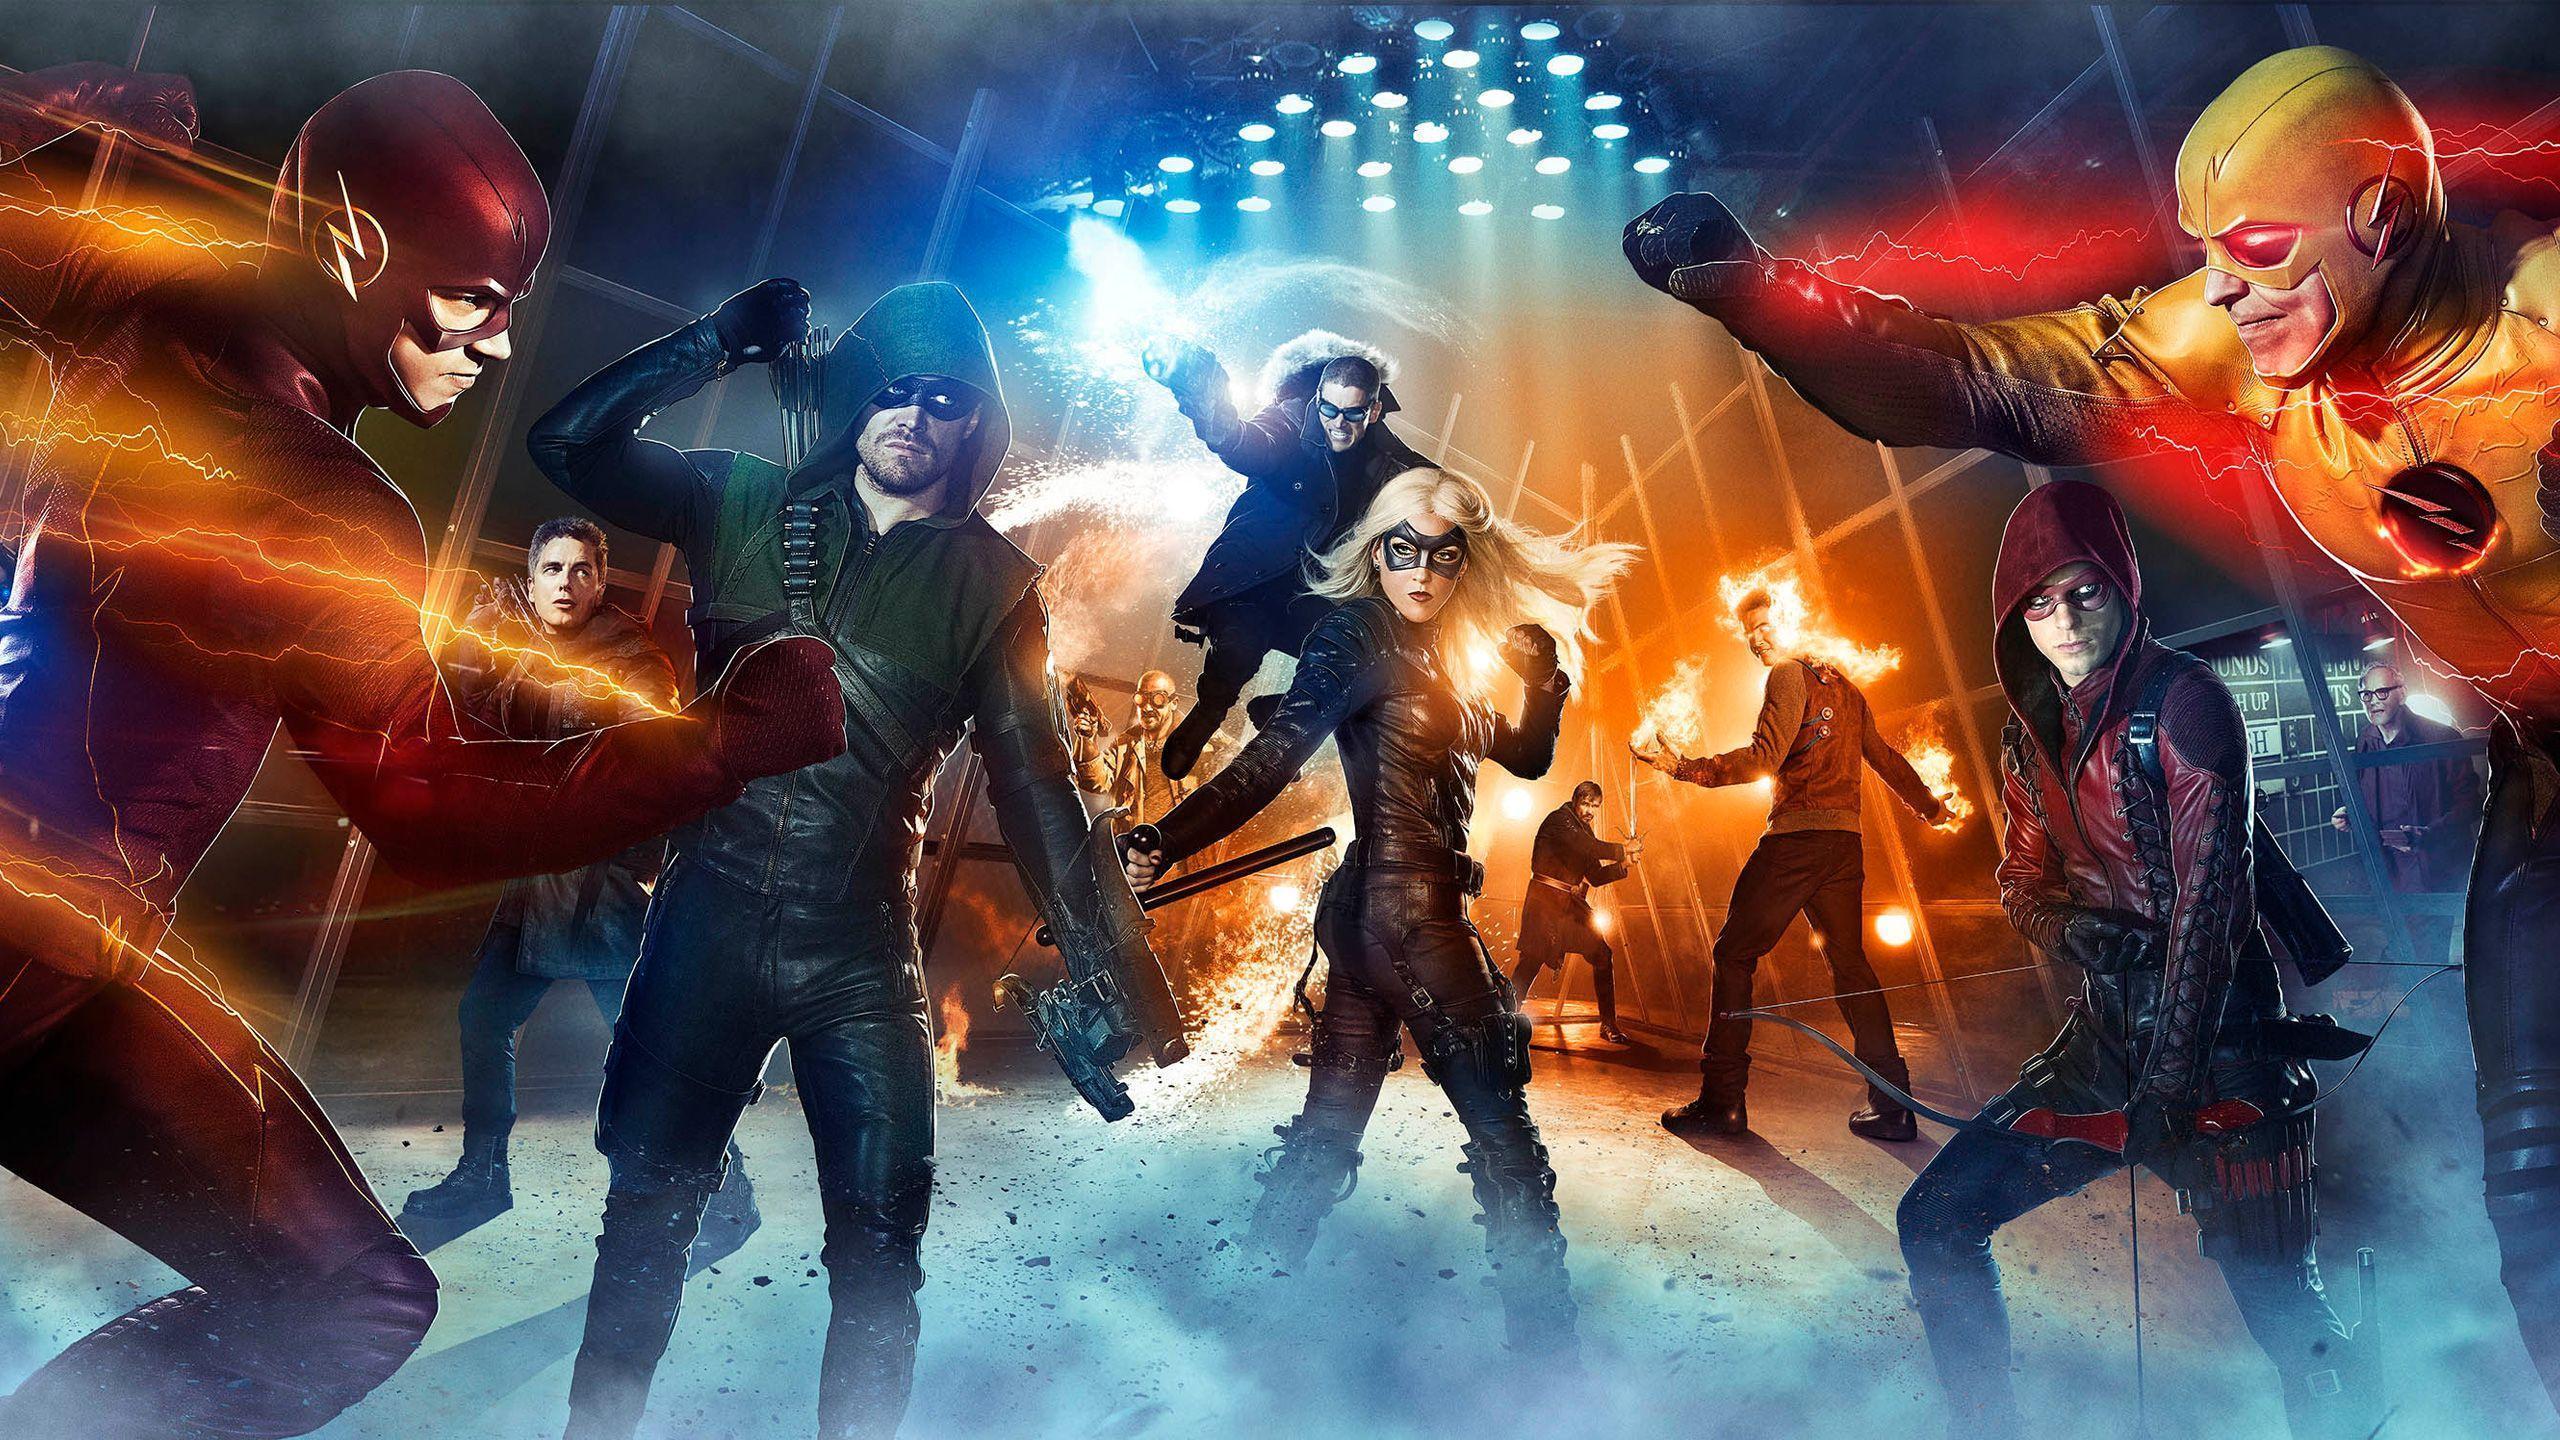 Download 13 Legends of Tomorrow Wallpaper. Wallpaper for iPhone, Android, Mobile and Desktop